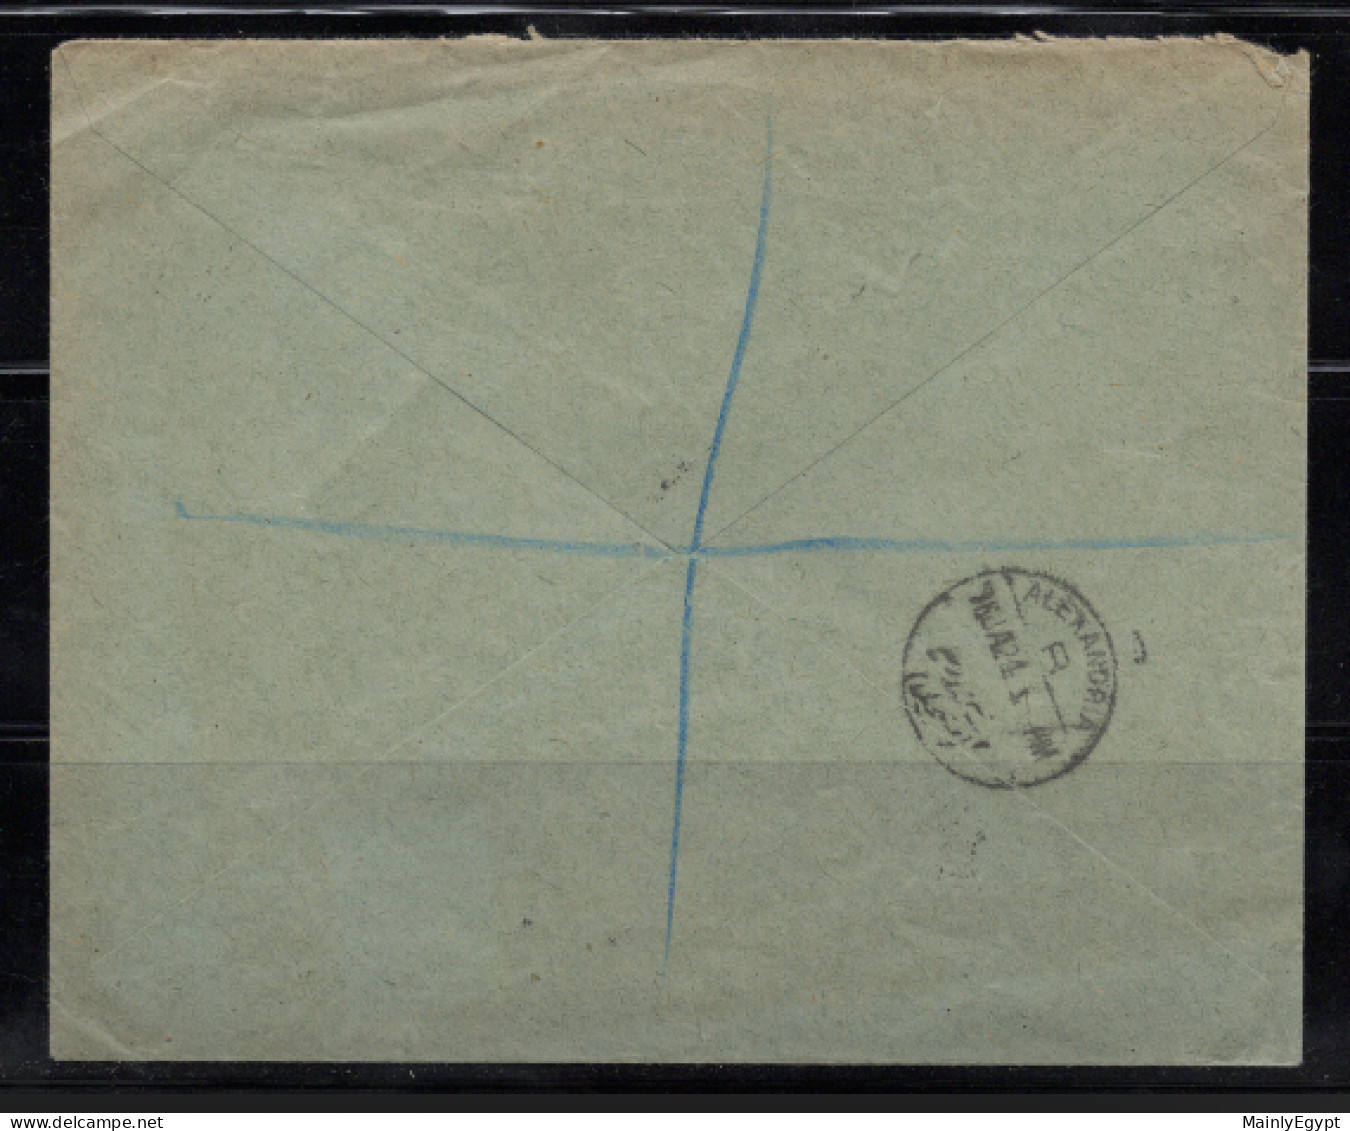 EGYPT: Cover 1924, With Mi60, 1922, 15 Mils Blue ME, From ZIFTA (CDS) To Alexandria, Registered Mail. #023 - 1915-1921 British Protectorate